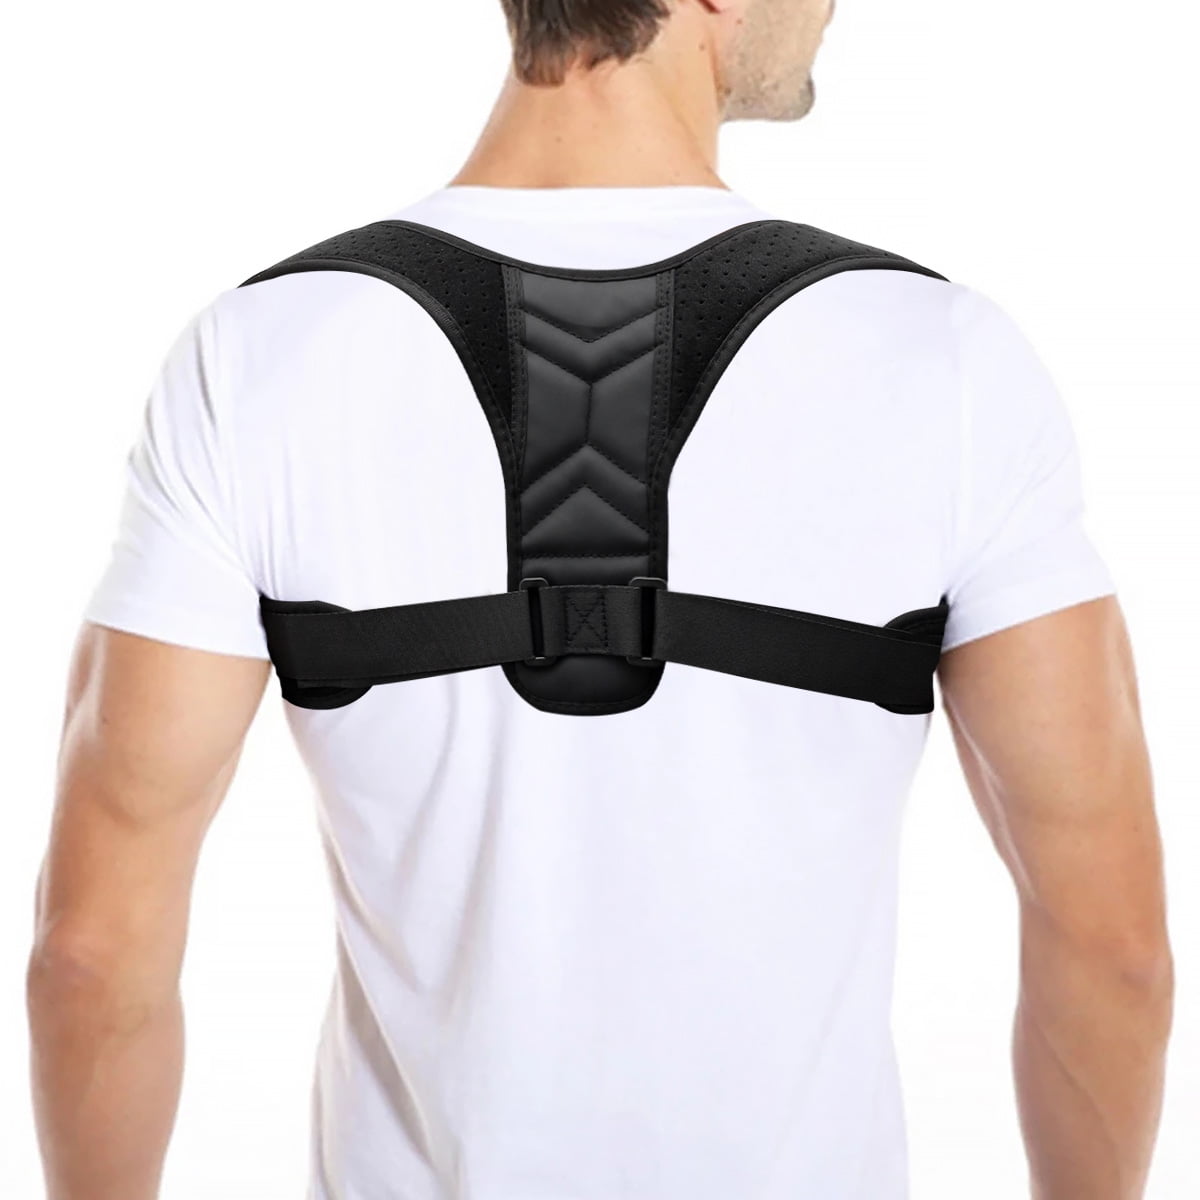 4WELL Posture Corrector For Women Men Effective and Comfortable Adjustable  Posture Correct Brace Back Brace Posture Brace Clavicle Support Brace  Posture Support Upper Back Pain Relief